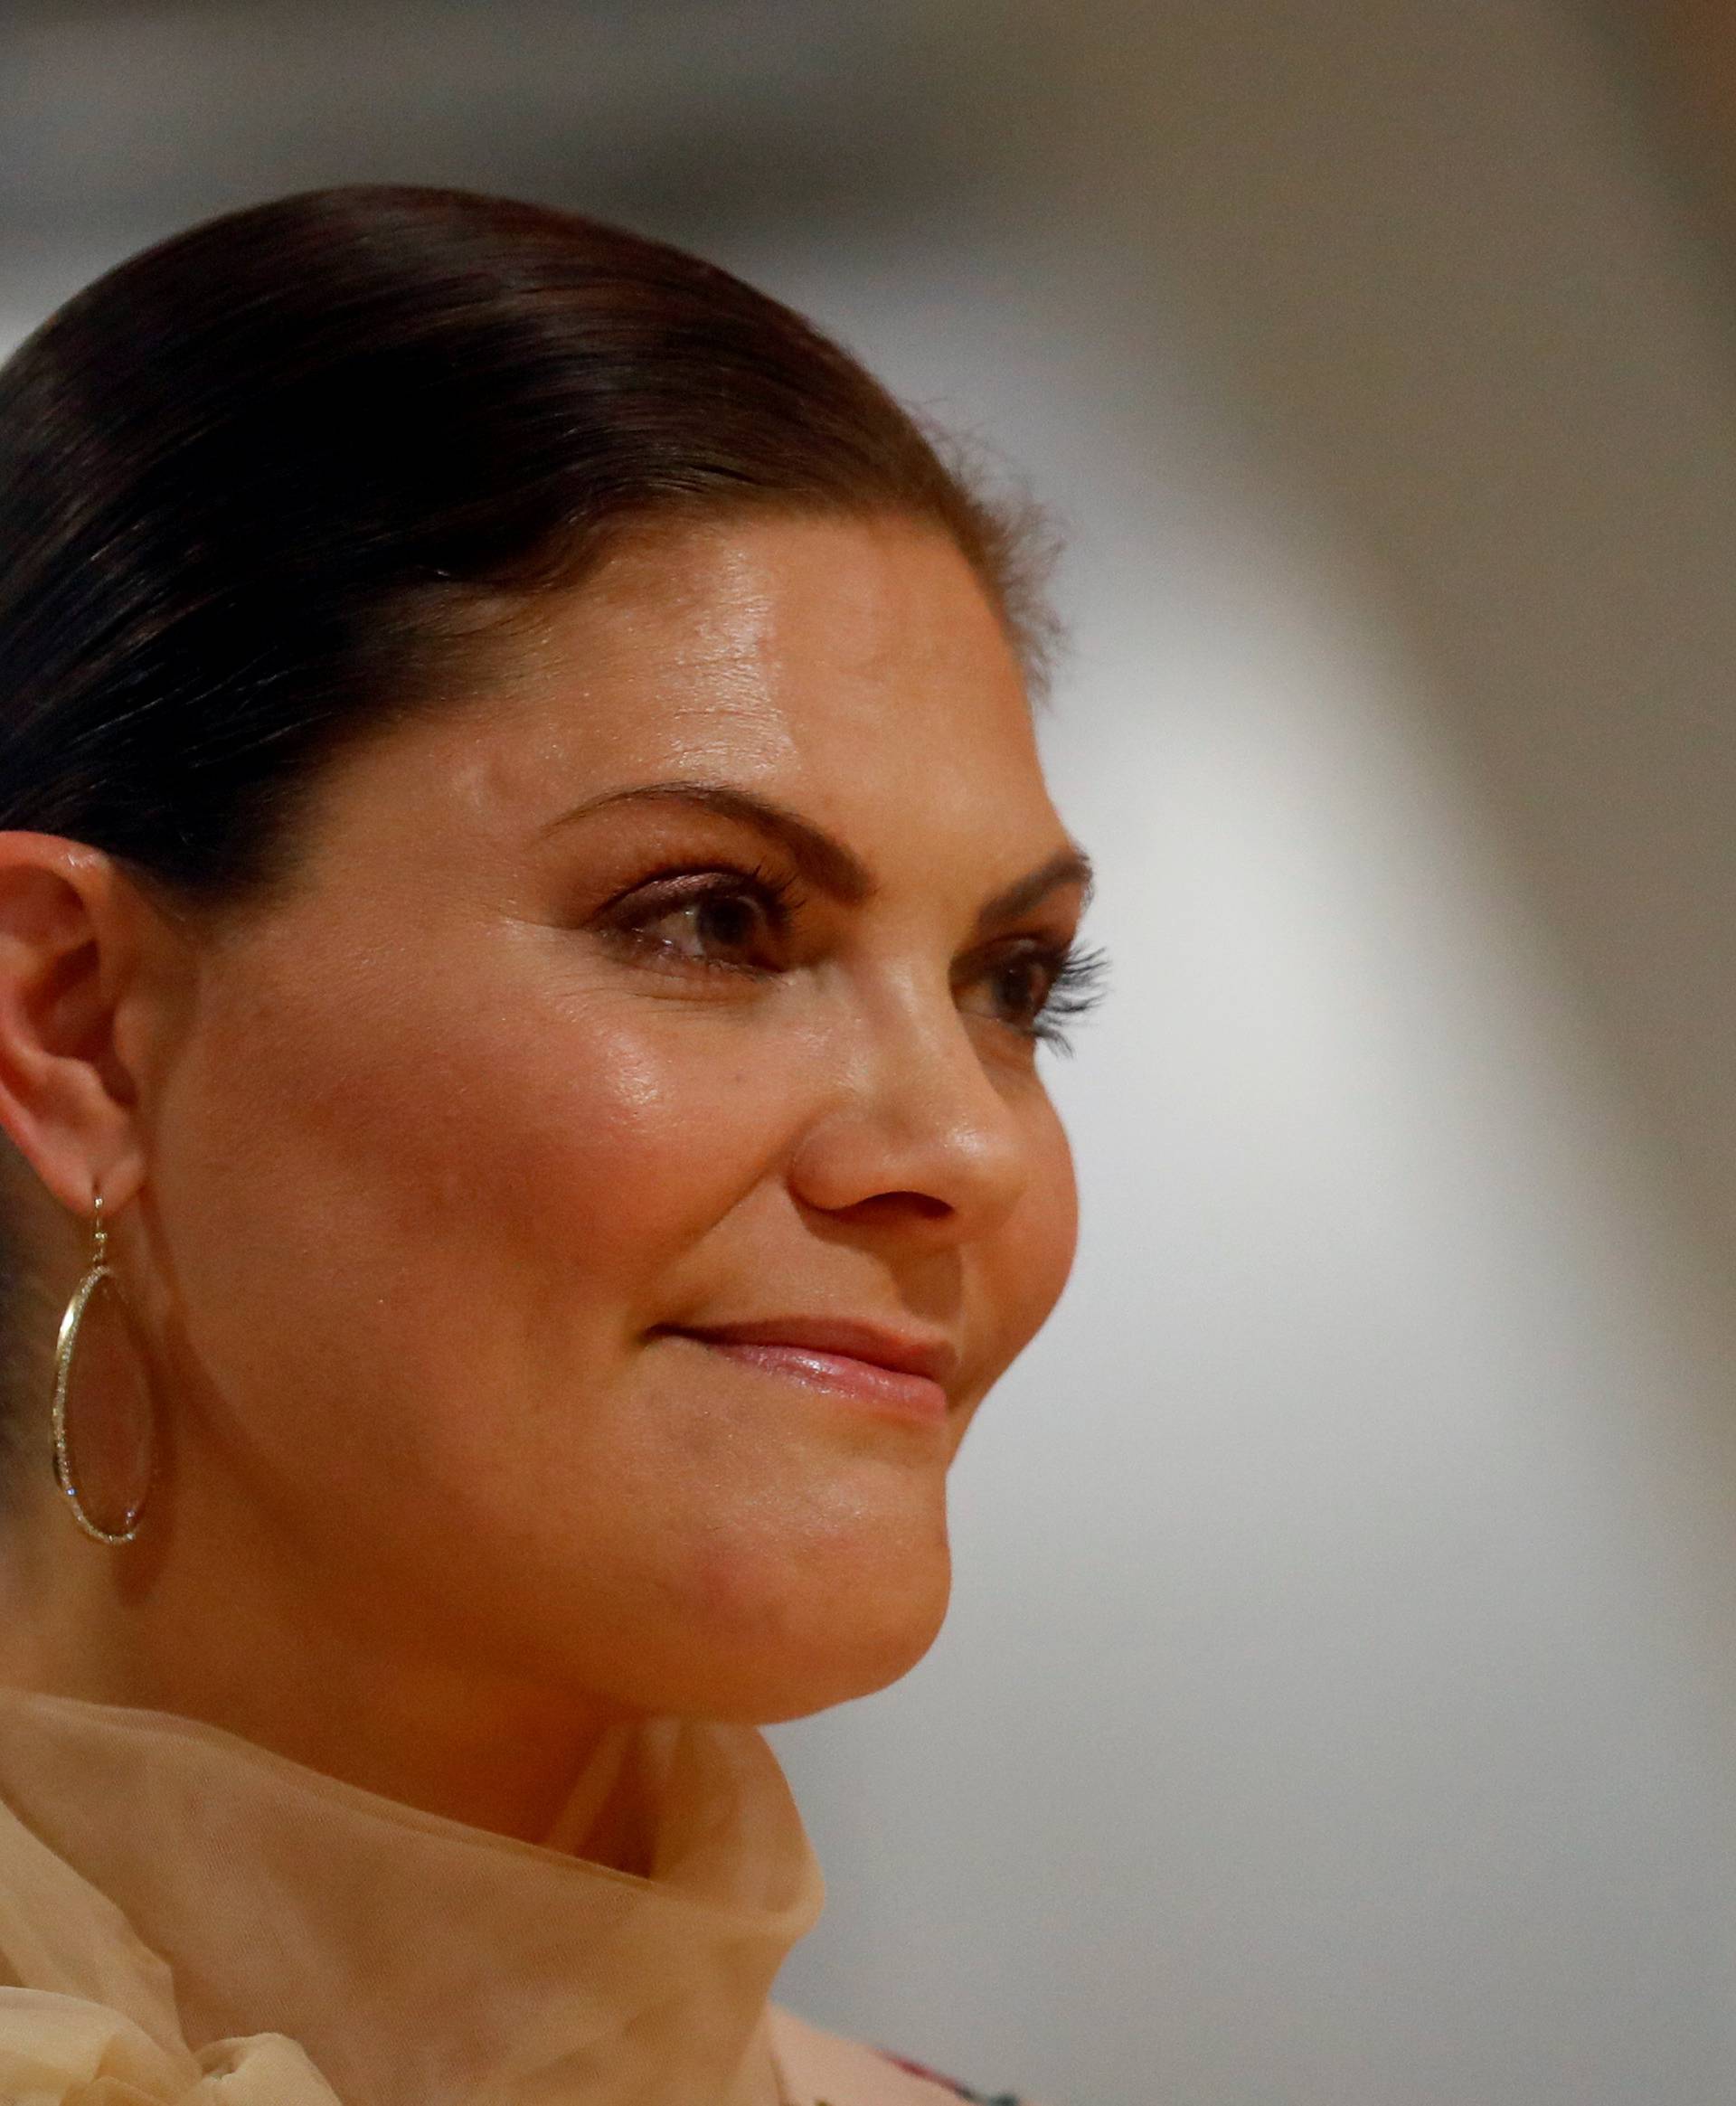 Sweden's Crown Princess Victoria attends a book presentation at the People's Bookshelf at Latvia's National Library in Riga